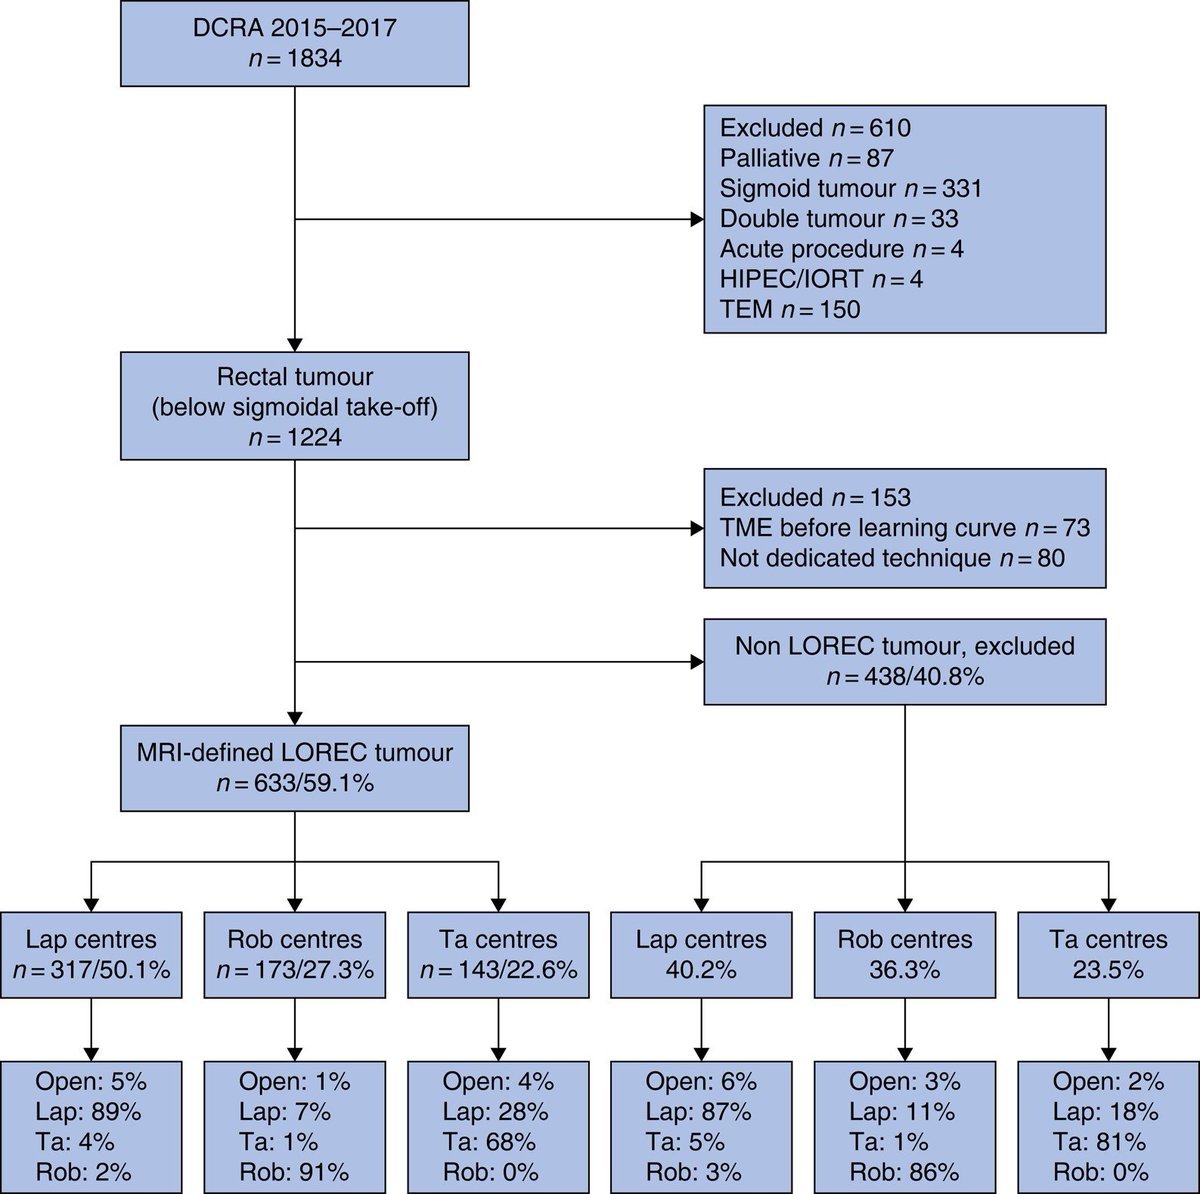 Total mesorectal excision in MRI-defined low rectal cancer: multicentre study comparing oncological outcomes of robotic, laparoscopic and transanal total mesorectal excision in high-volume centres ➡️doi.org/10.1093/bjsope… This multicentre, retrospective cohort study showed that